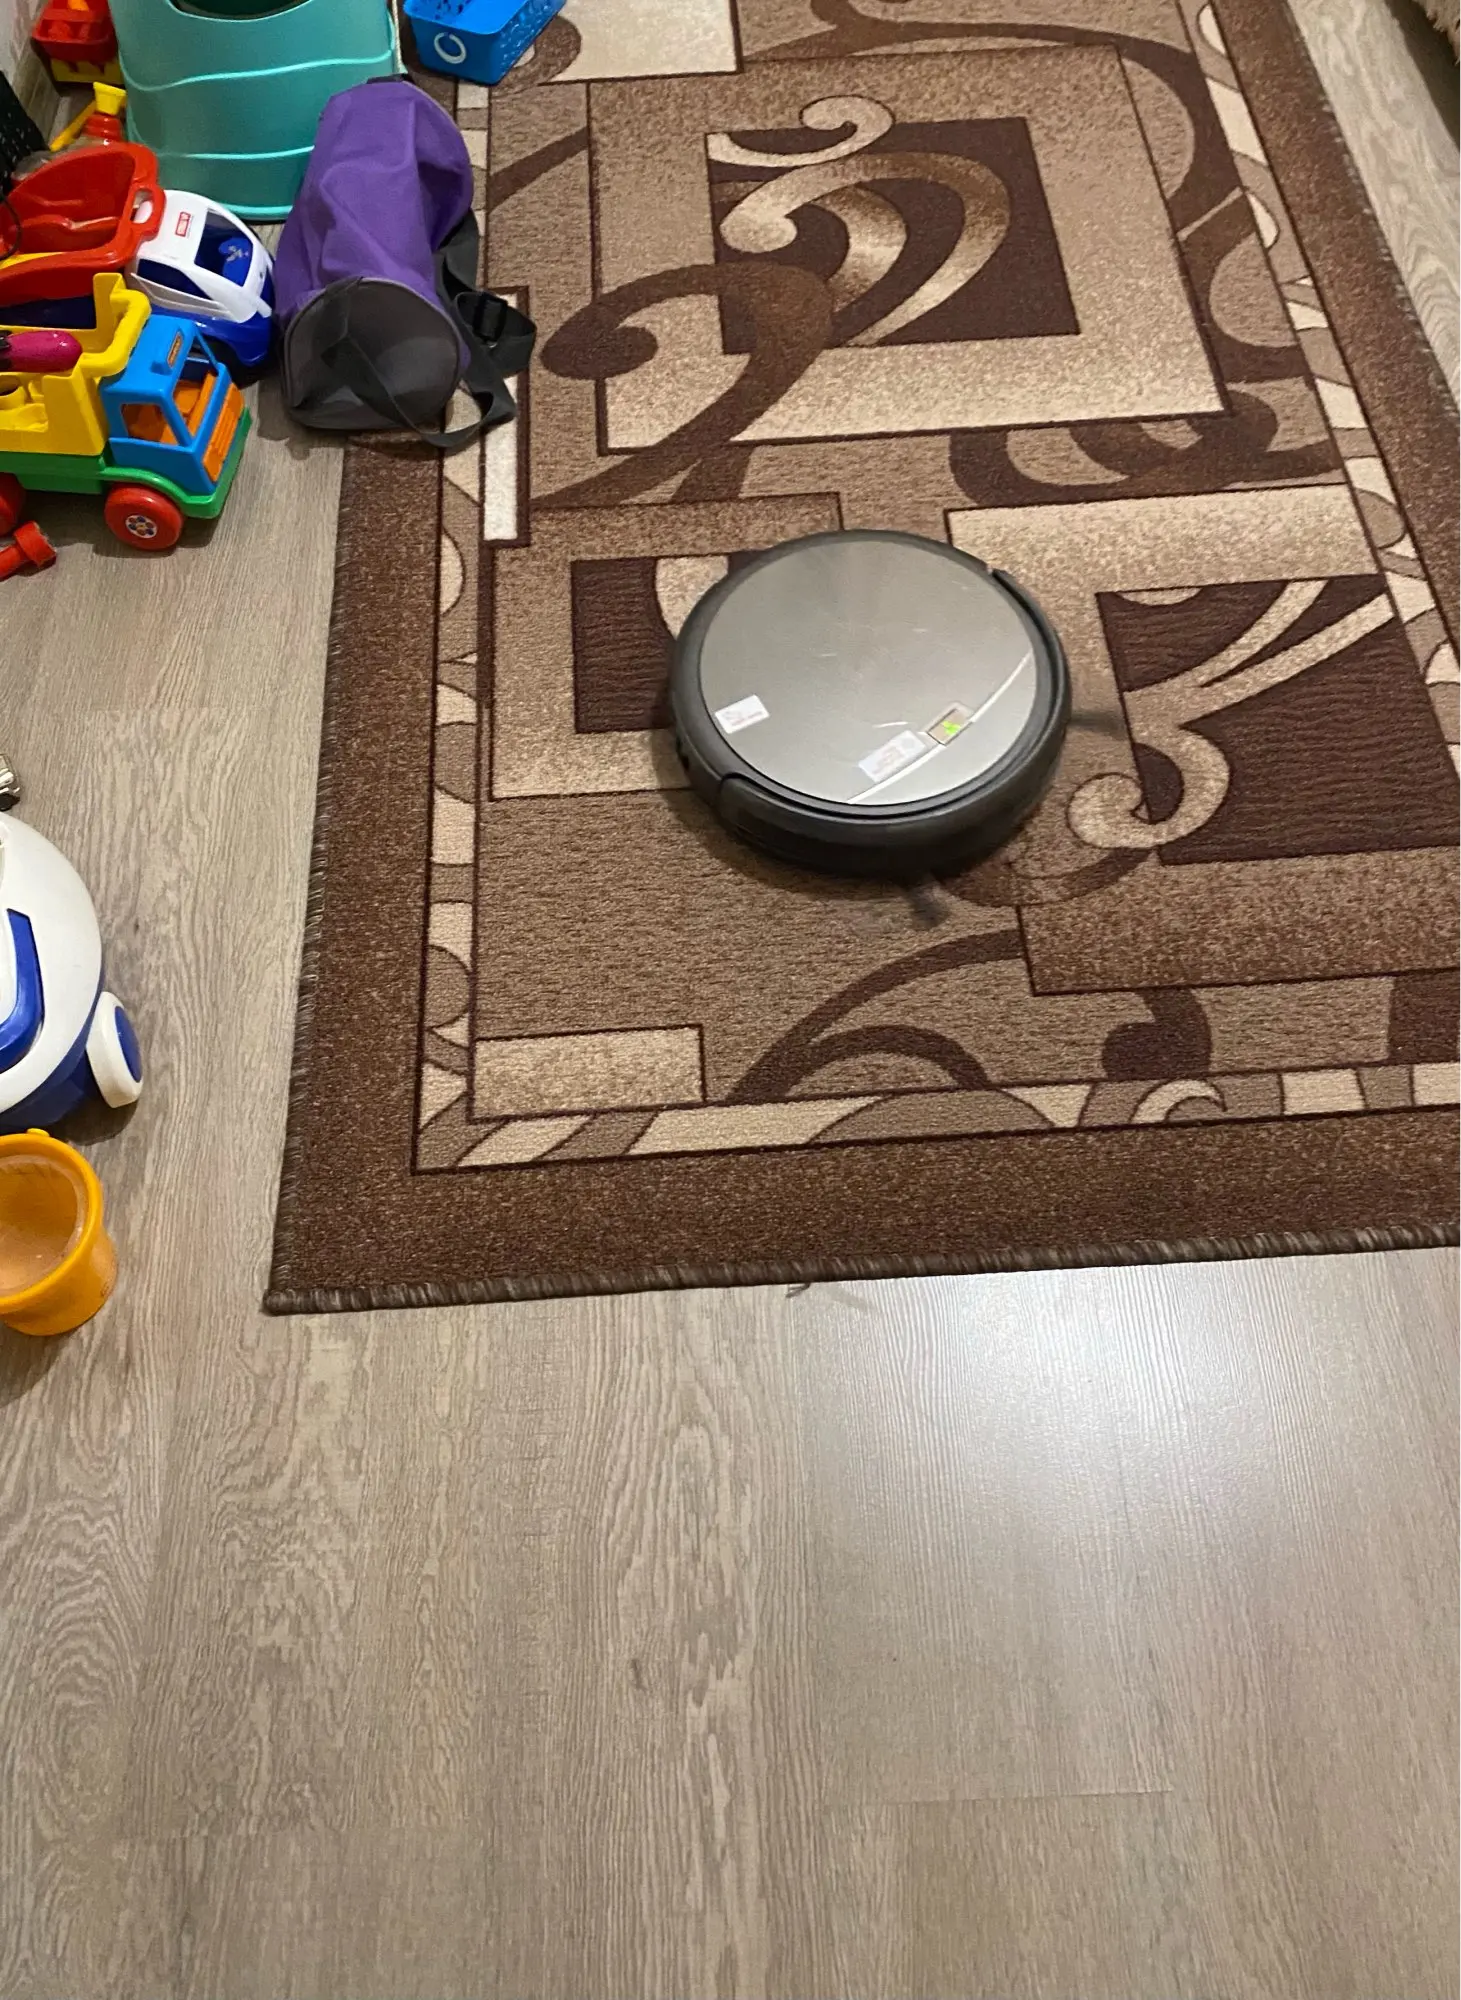 ILIFE A4s Robot Vacuum Cleaner , Carpet & Hard Floor Large Dustbin,Auto Recharge Household Tools,Applicance|robot vacuum cleaner|vacuum cleanerrobot vacuum - AliExpress